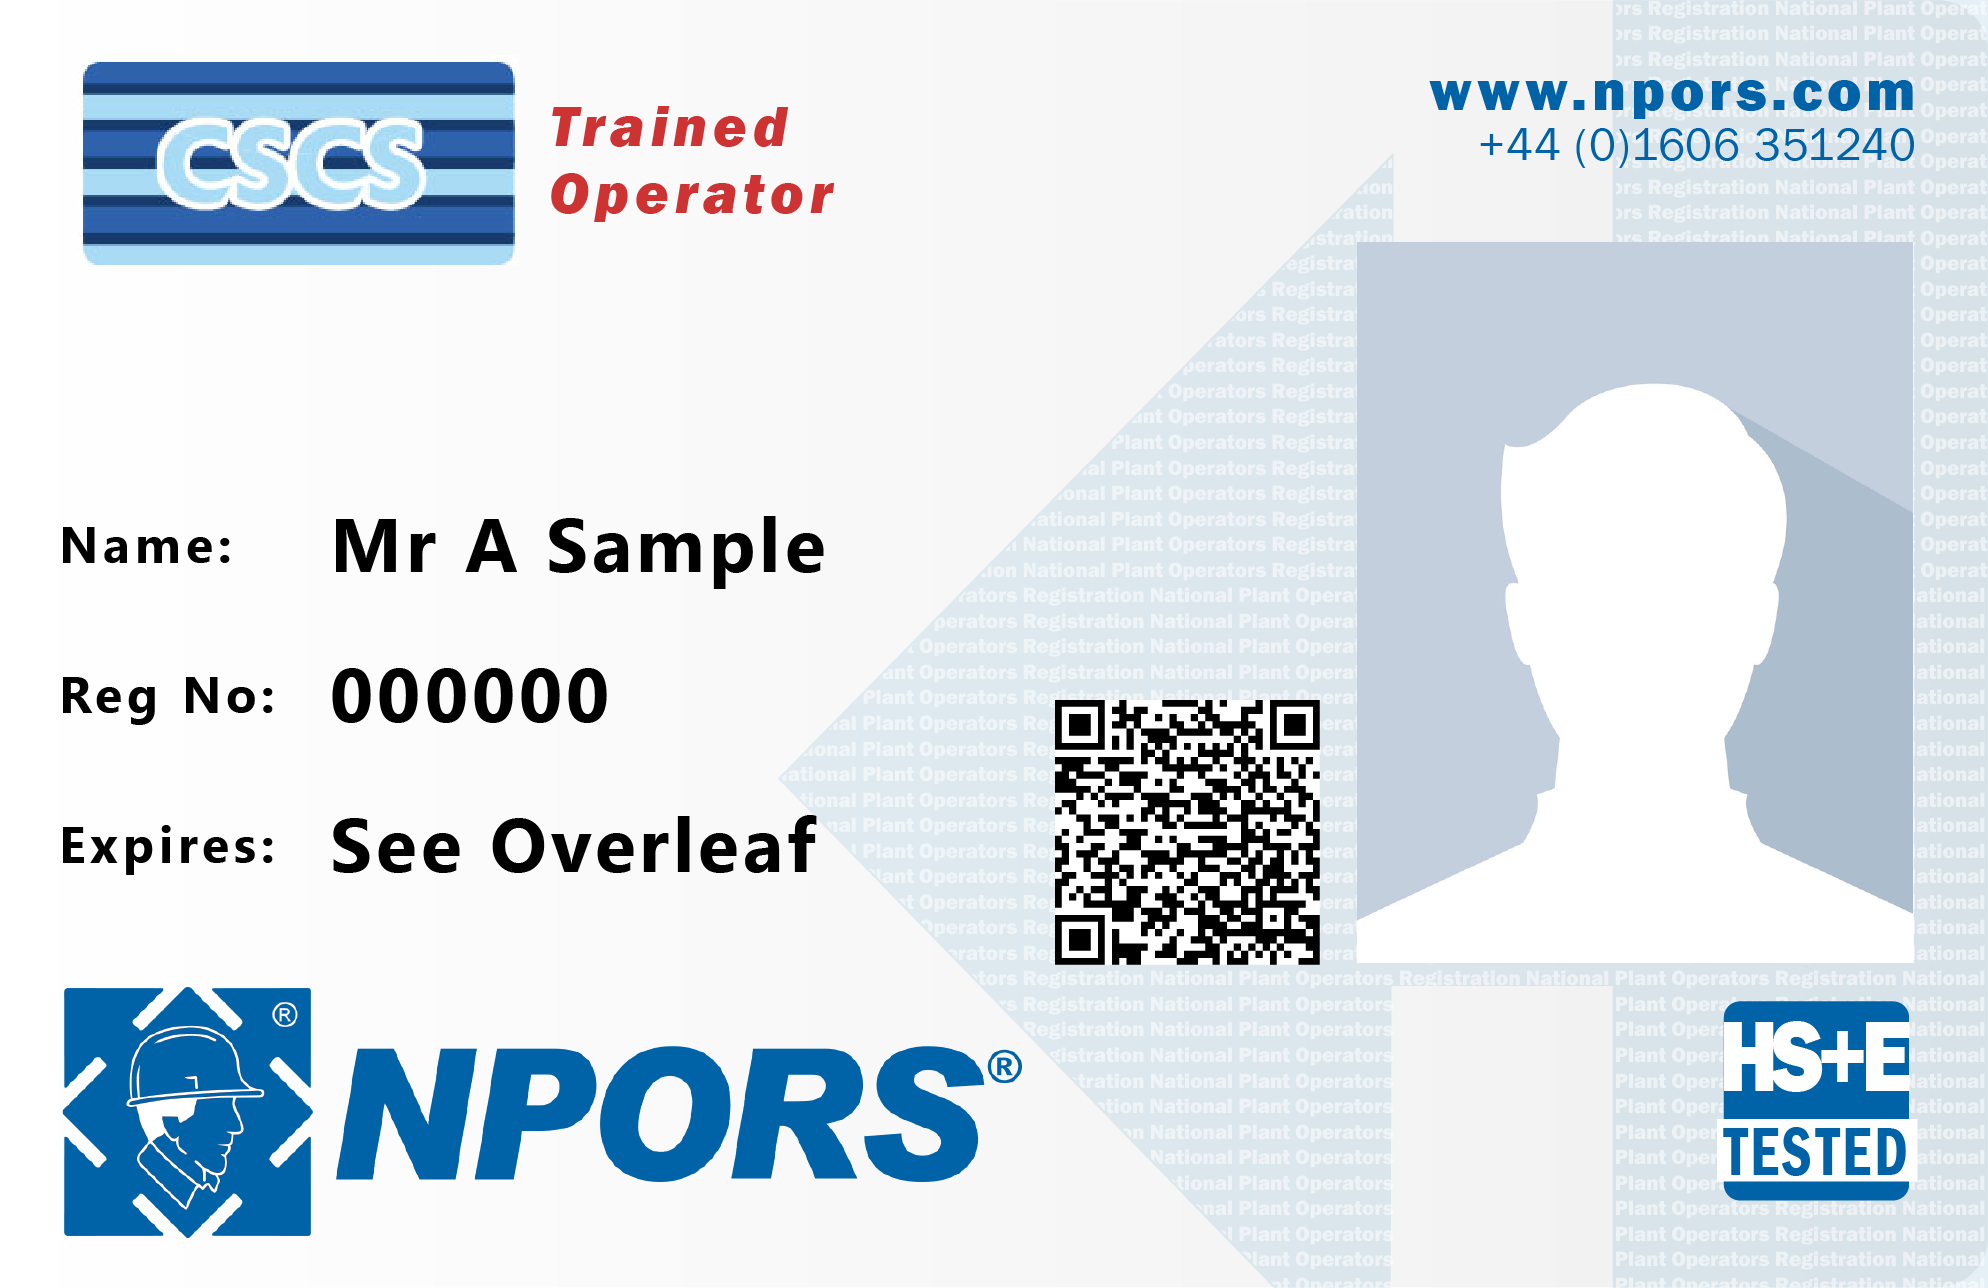 NPORS trained operator